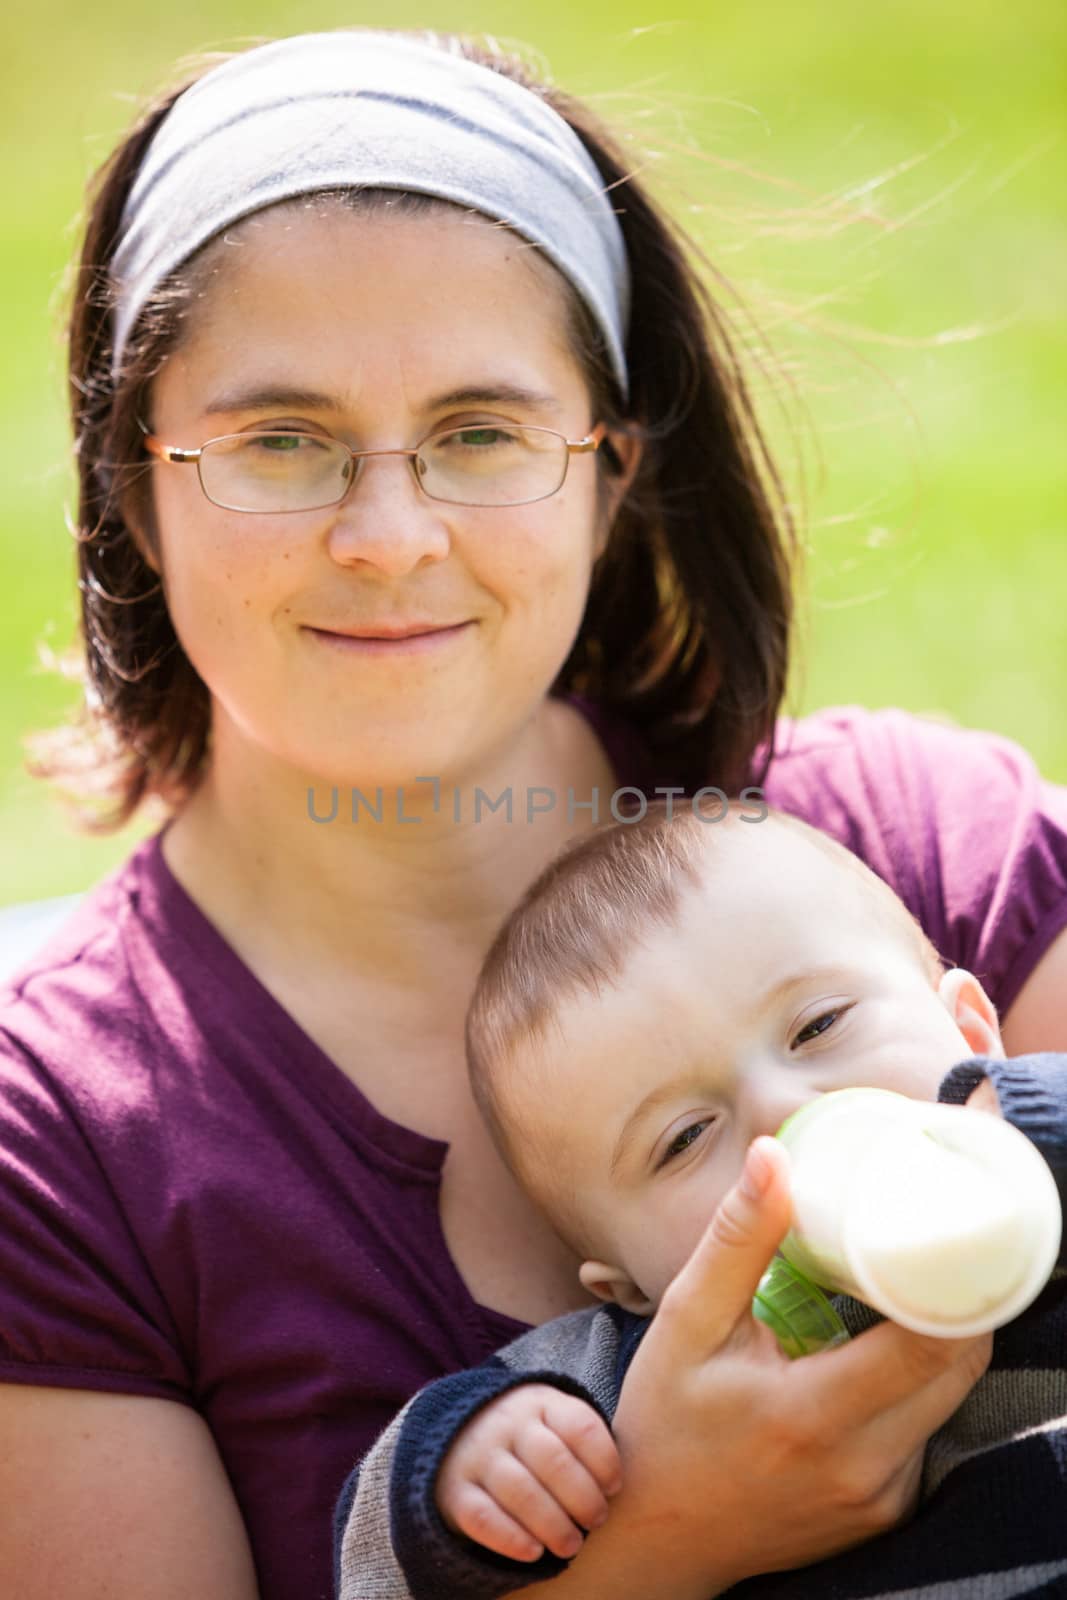 Mother feeding her baby with a milk bottle